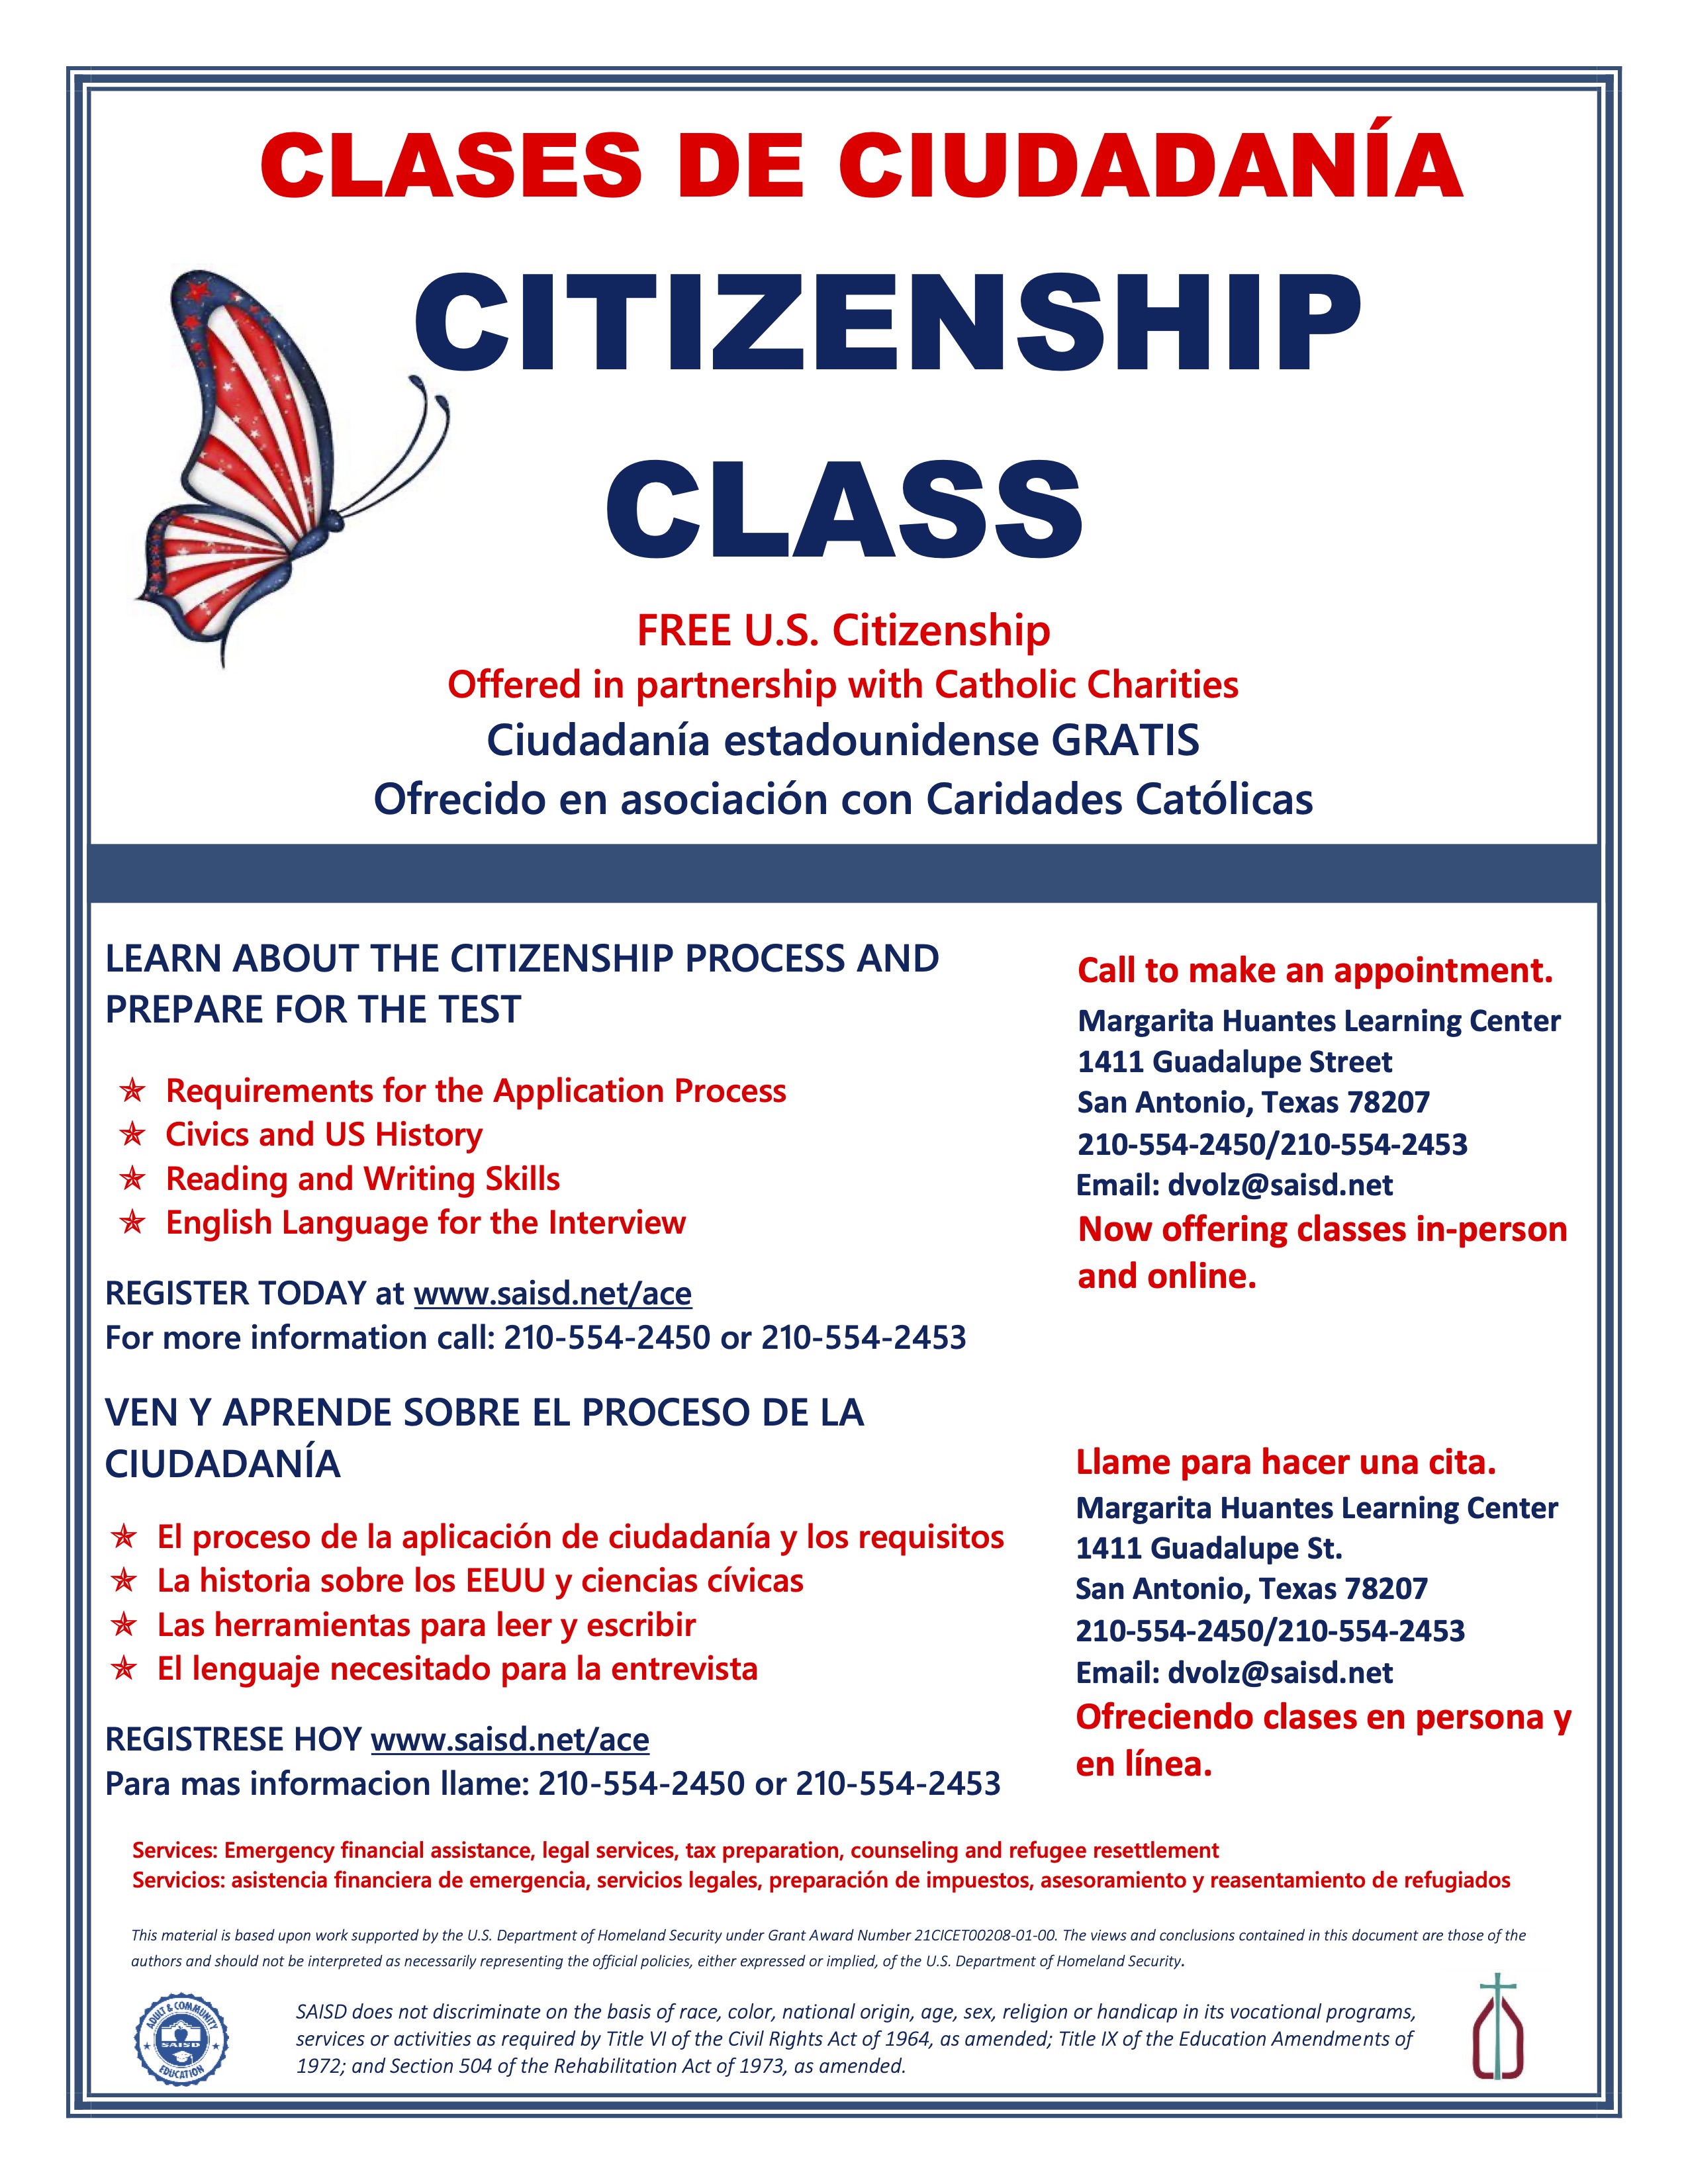 Citizenship Classes with Catholic Charities